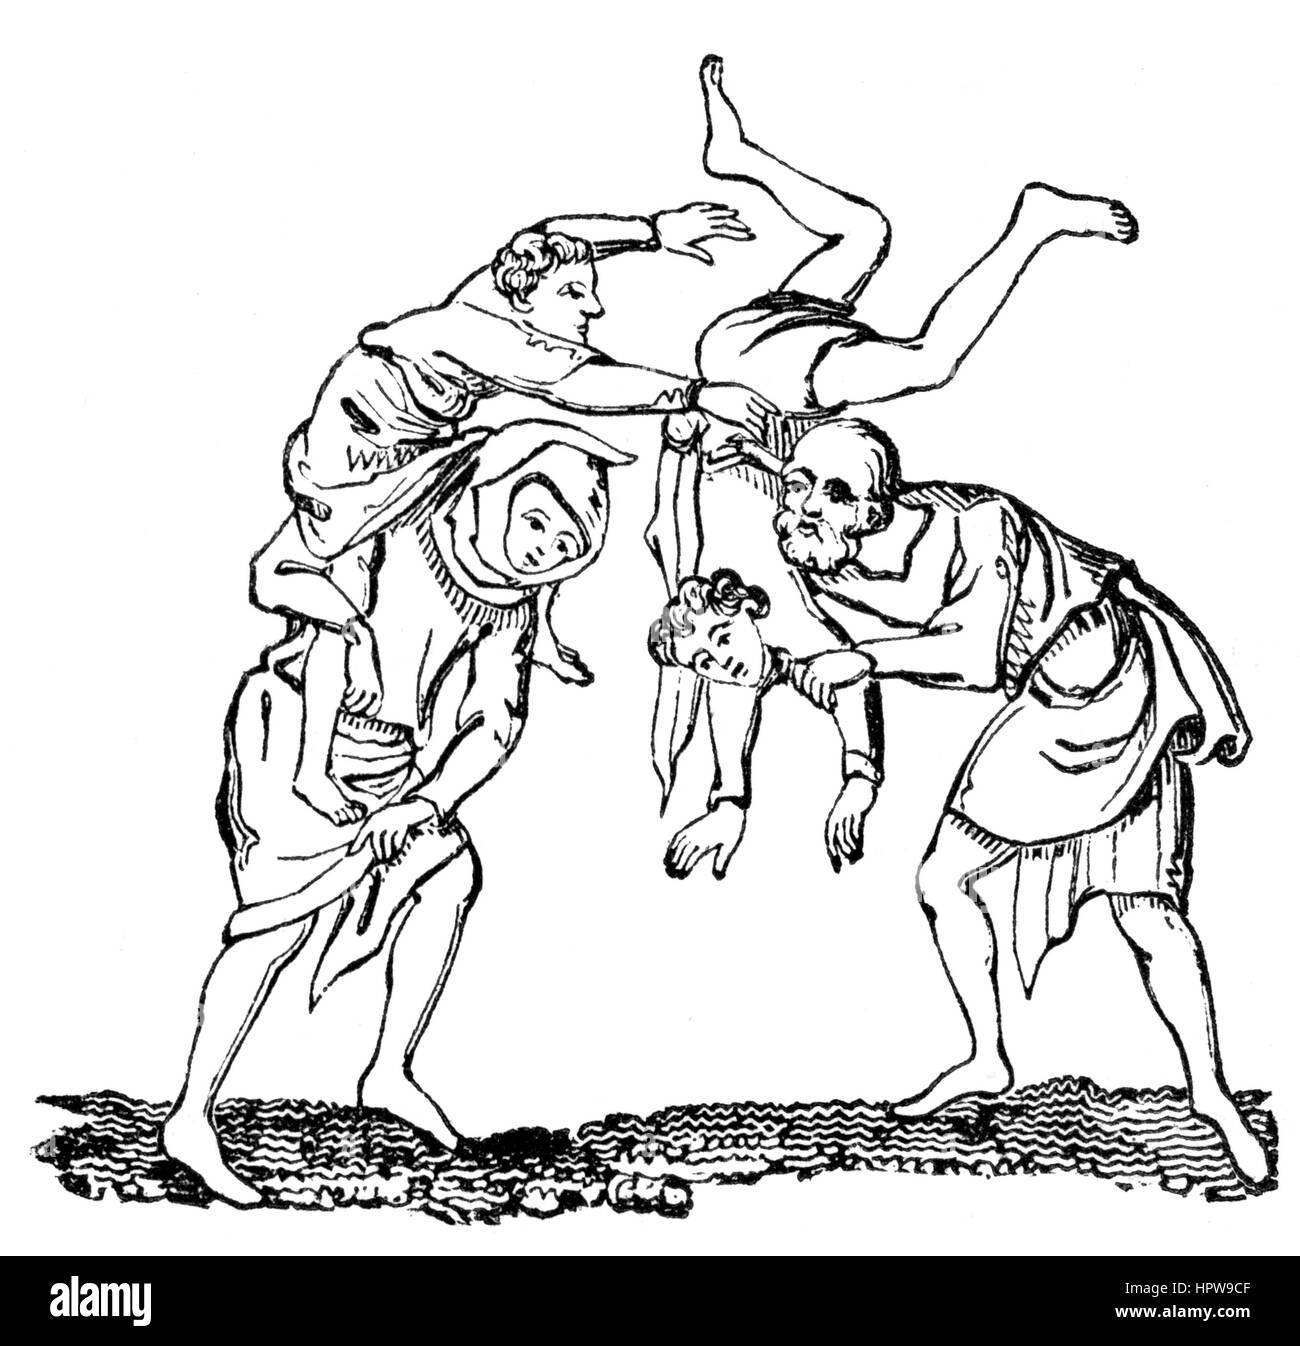 An illustration of Hippas Wrestling in the 14th Century scanned at high resolution from a book printed in 1831.  Believed copyright free. Stock Photo